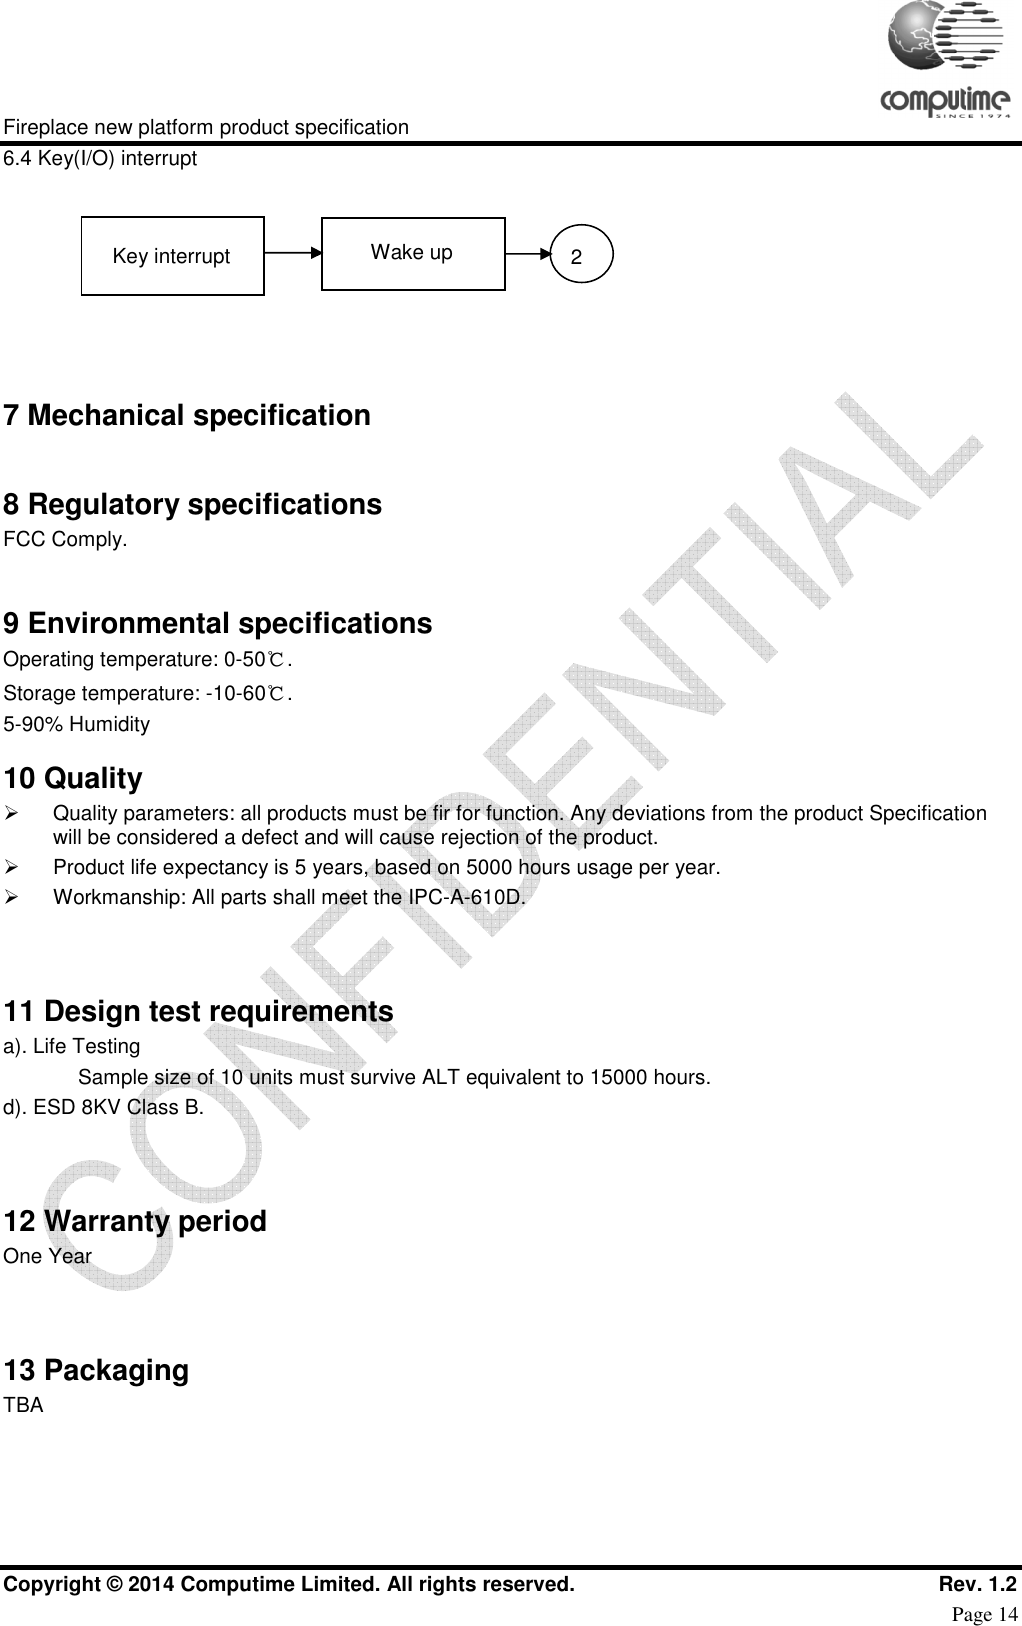     Fireplace new platform product specification Copyright © 2014 Computime Limited. All rights reserved.                                                    Rev. 1.2 Page 14 6.4 Key(I/O) interrupt  7 Mechanical specification  8 Regulatory specifications FCC Comply.  9 Environmental specifications Operating temperature: 0-50℃. Storage temperature: -10-60℃. 5-90% Humidity 10 Quality   Quality parameters: all products must be fir for function. Any deviations from the product Specification will be considered a defect and will cause rejection of the product.    Product life expectancy is 5 years, based on 5000 hours usage per year.   Workmanship: All parts shall meet the IPC-A-610D.   11 Design test requirements a). Life Testing Sample size of 10 units must survive ALT equivalent to 15000 hours. d). ESD 8KV Class B.   12 Warranty period One Year   13 Packaging TBA   Key interrupt 2Wake up 